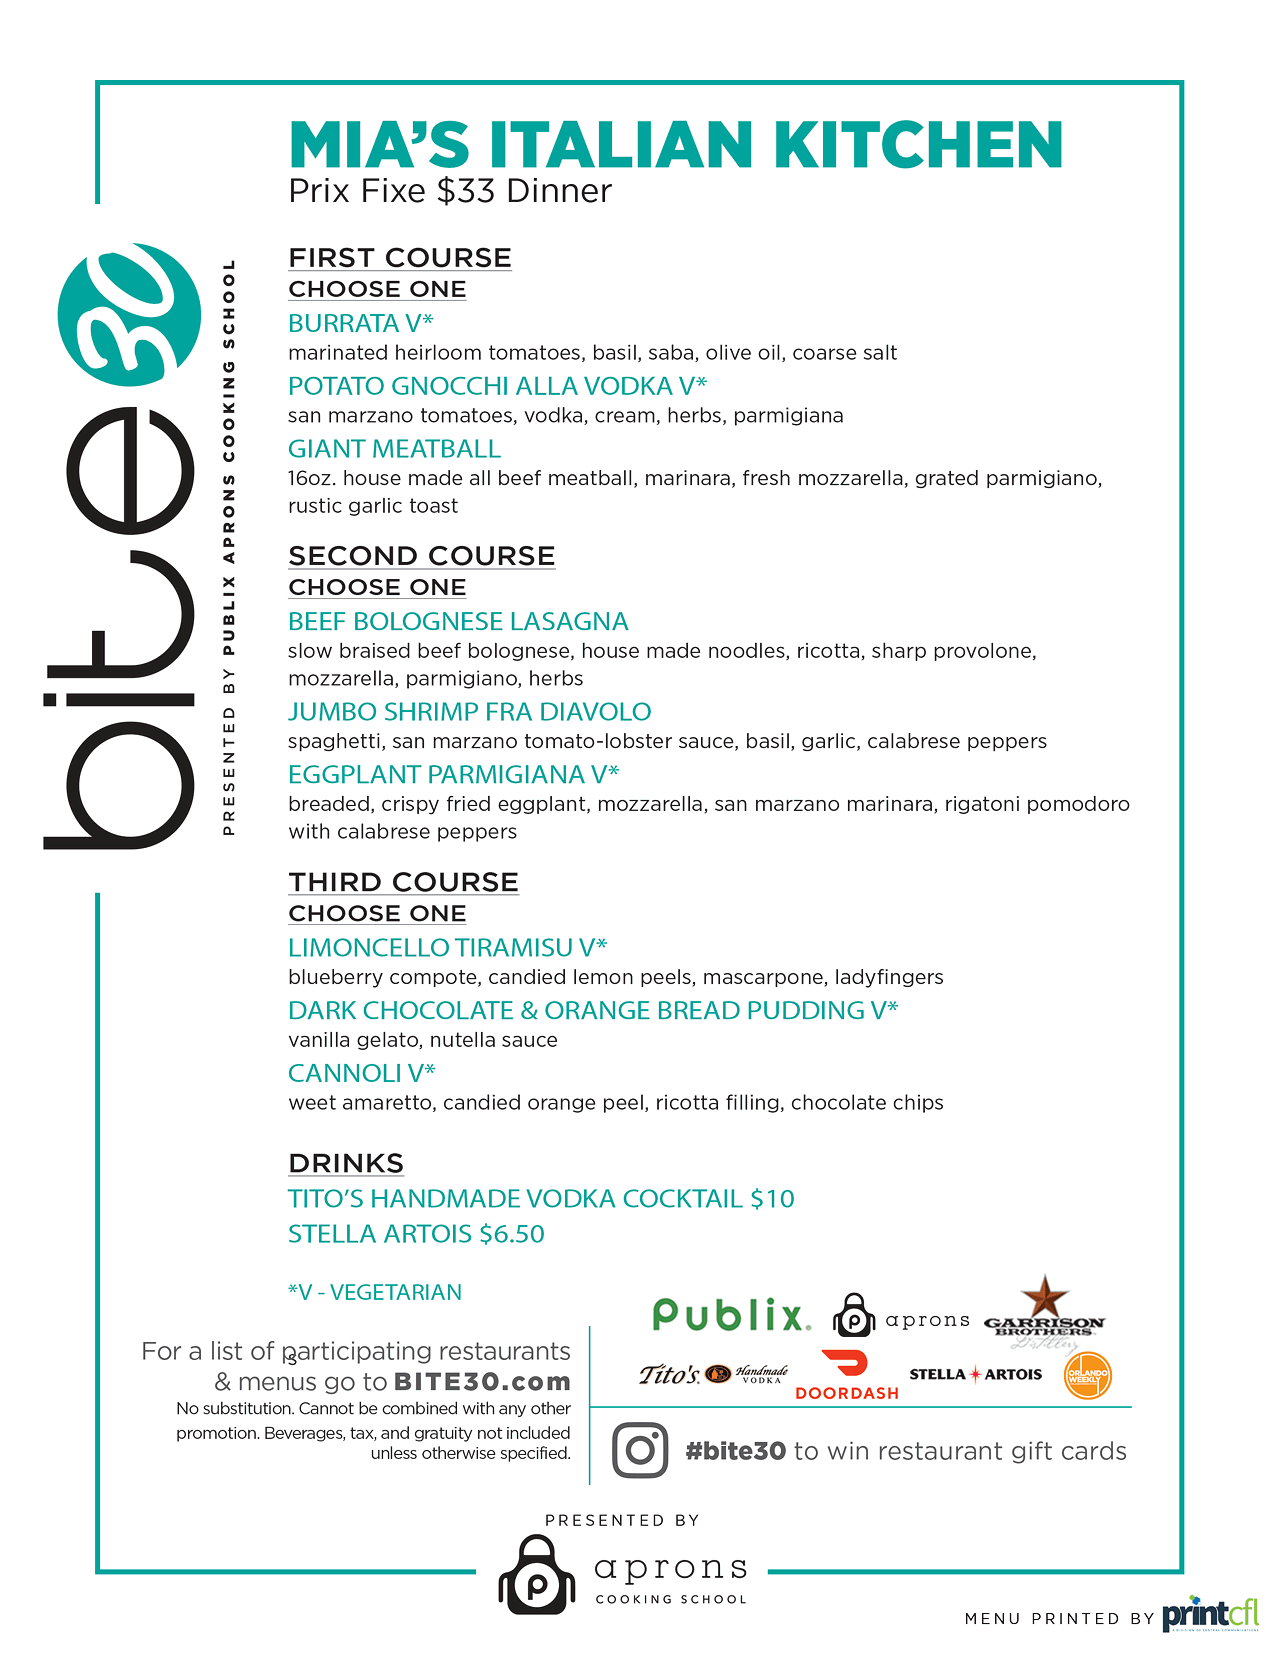 Here are all the menus for Orlando's Bite30 2022